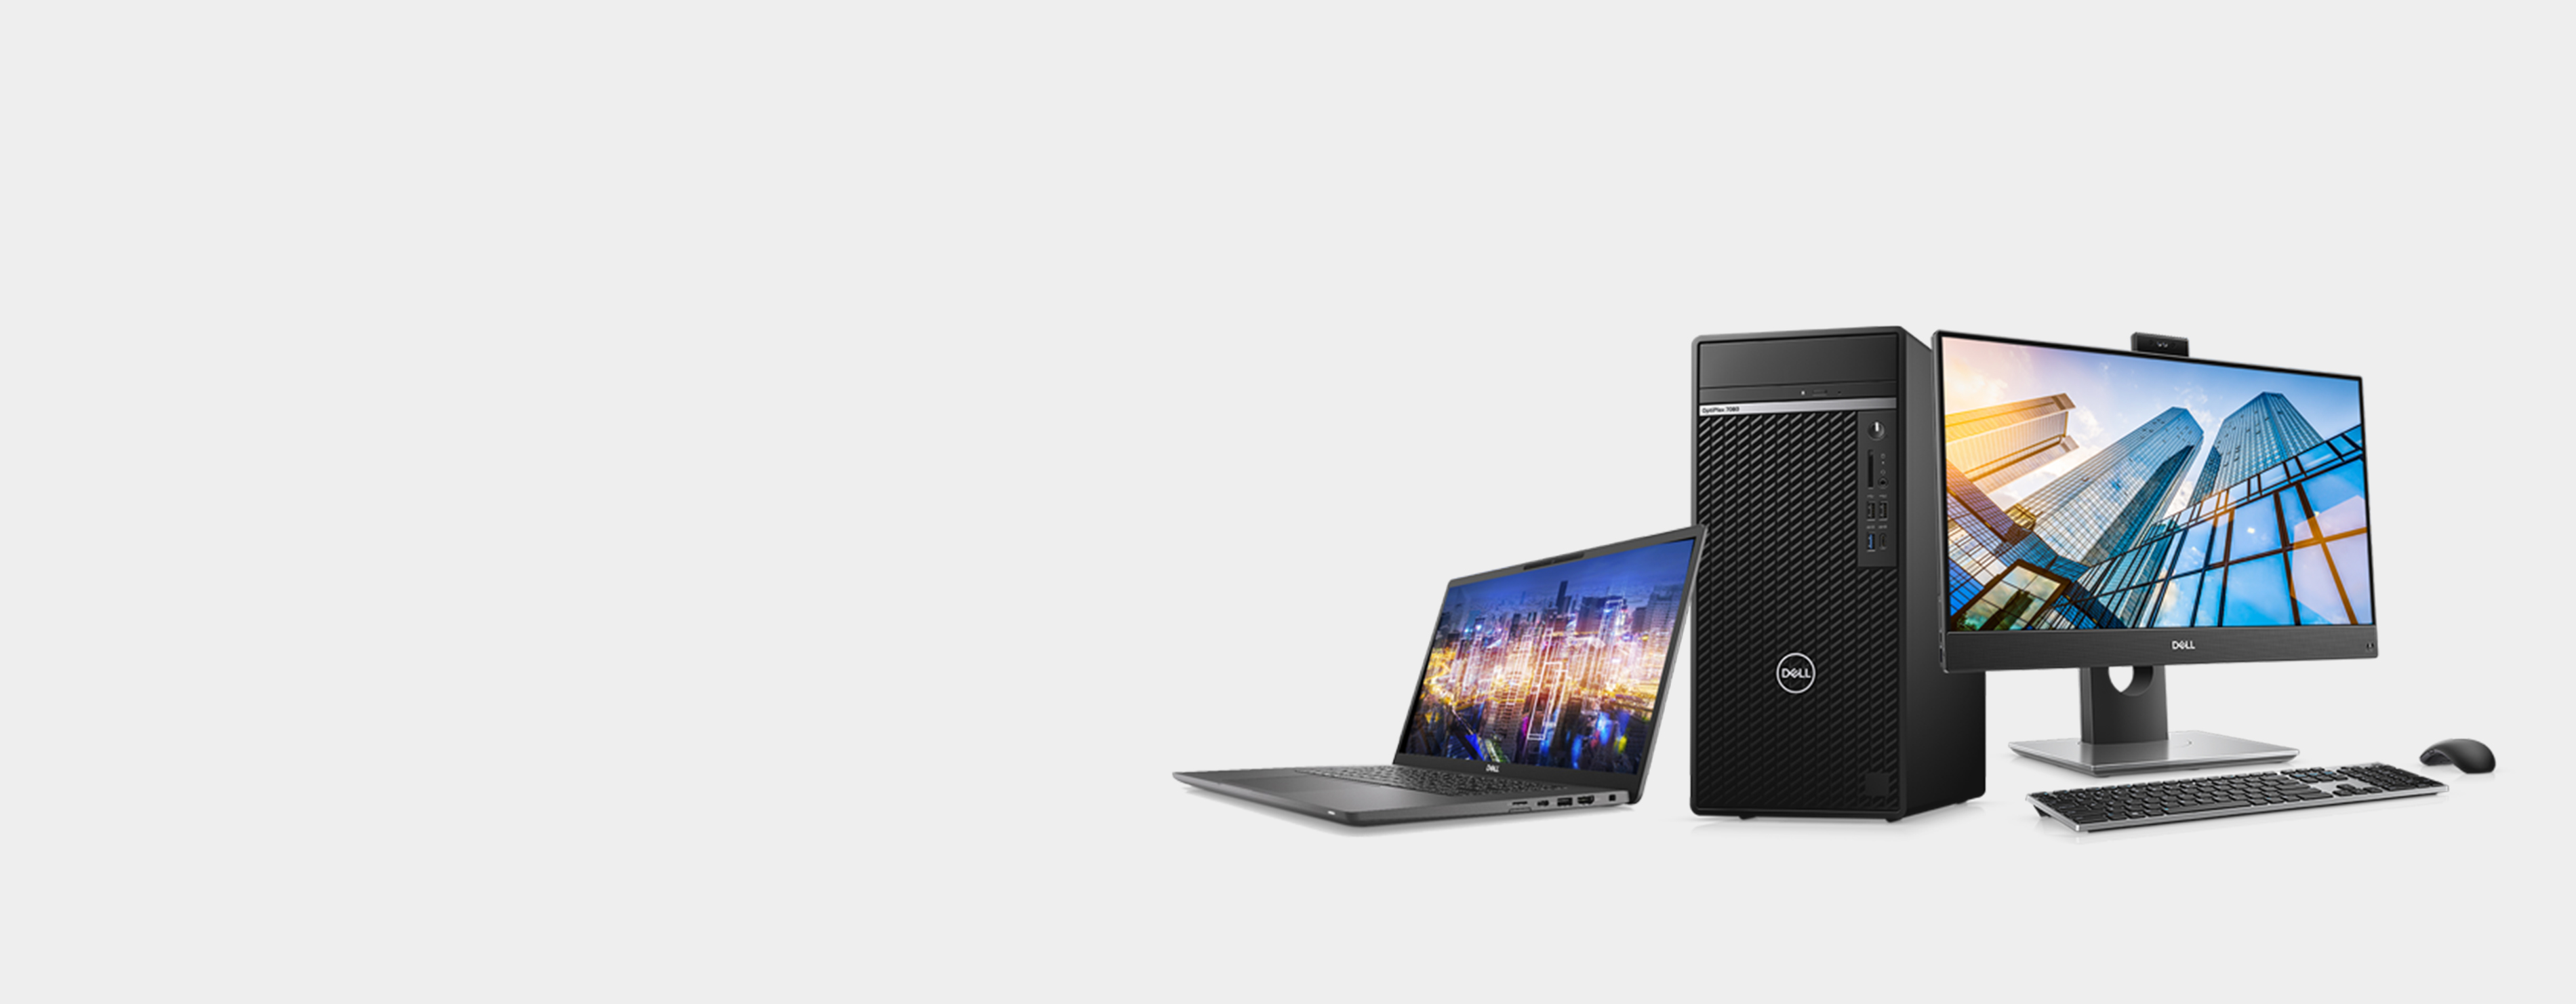 Dell XPS 13 (9300) Laptop: "Overall, the 9300 feels like a reliable, high-performance, future-proofed device." — Newstalk ZB